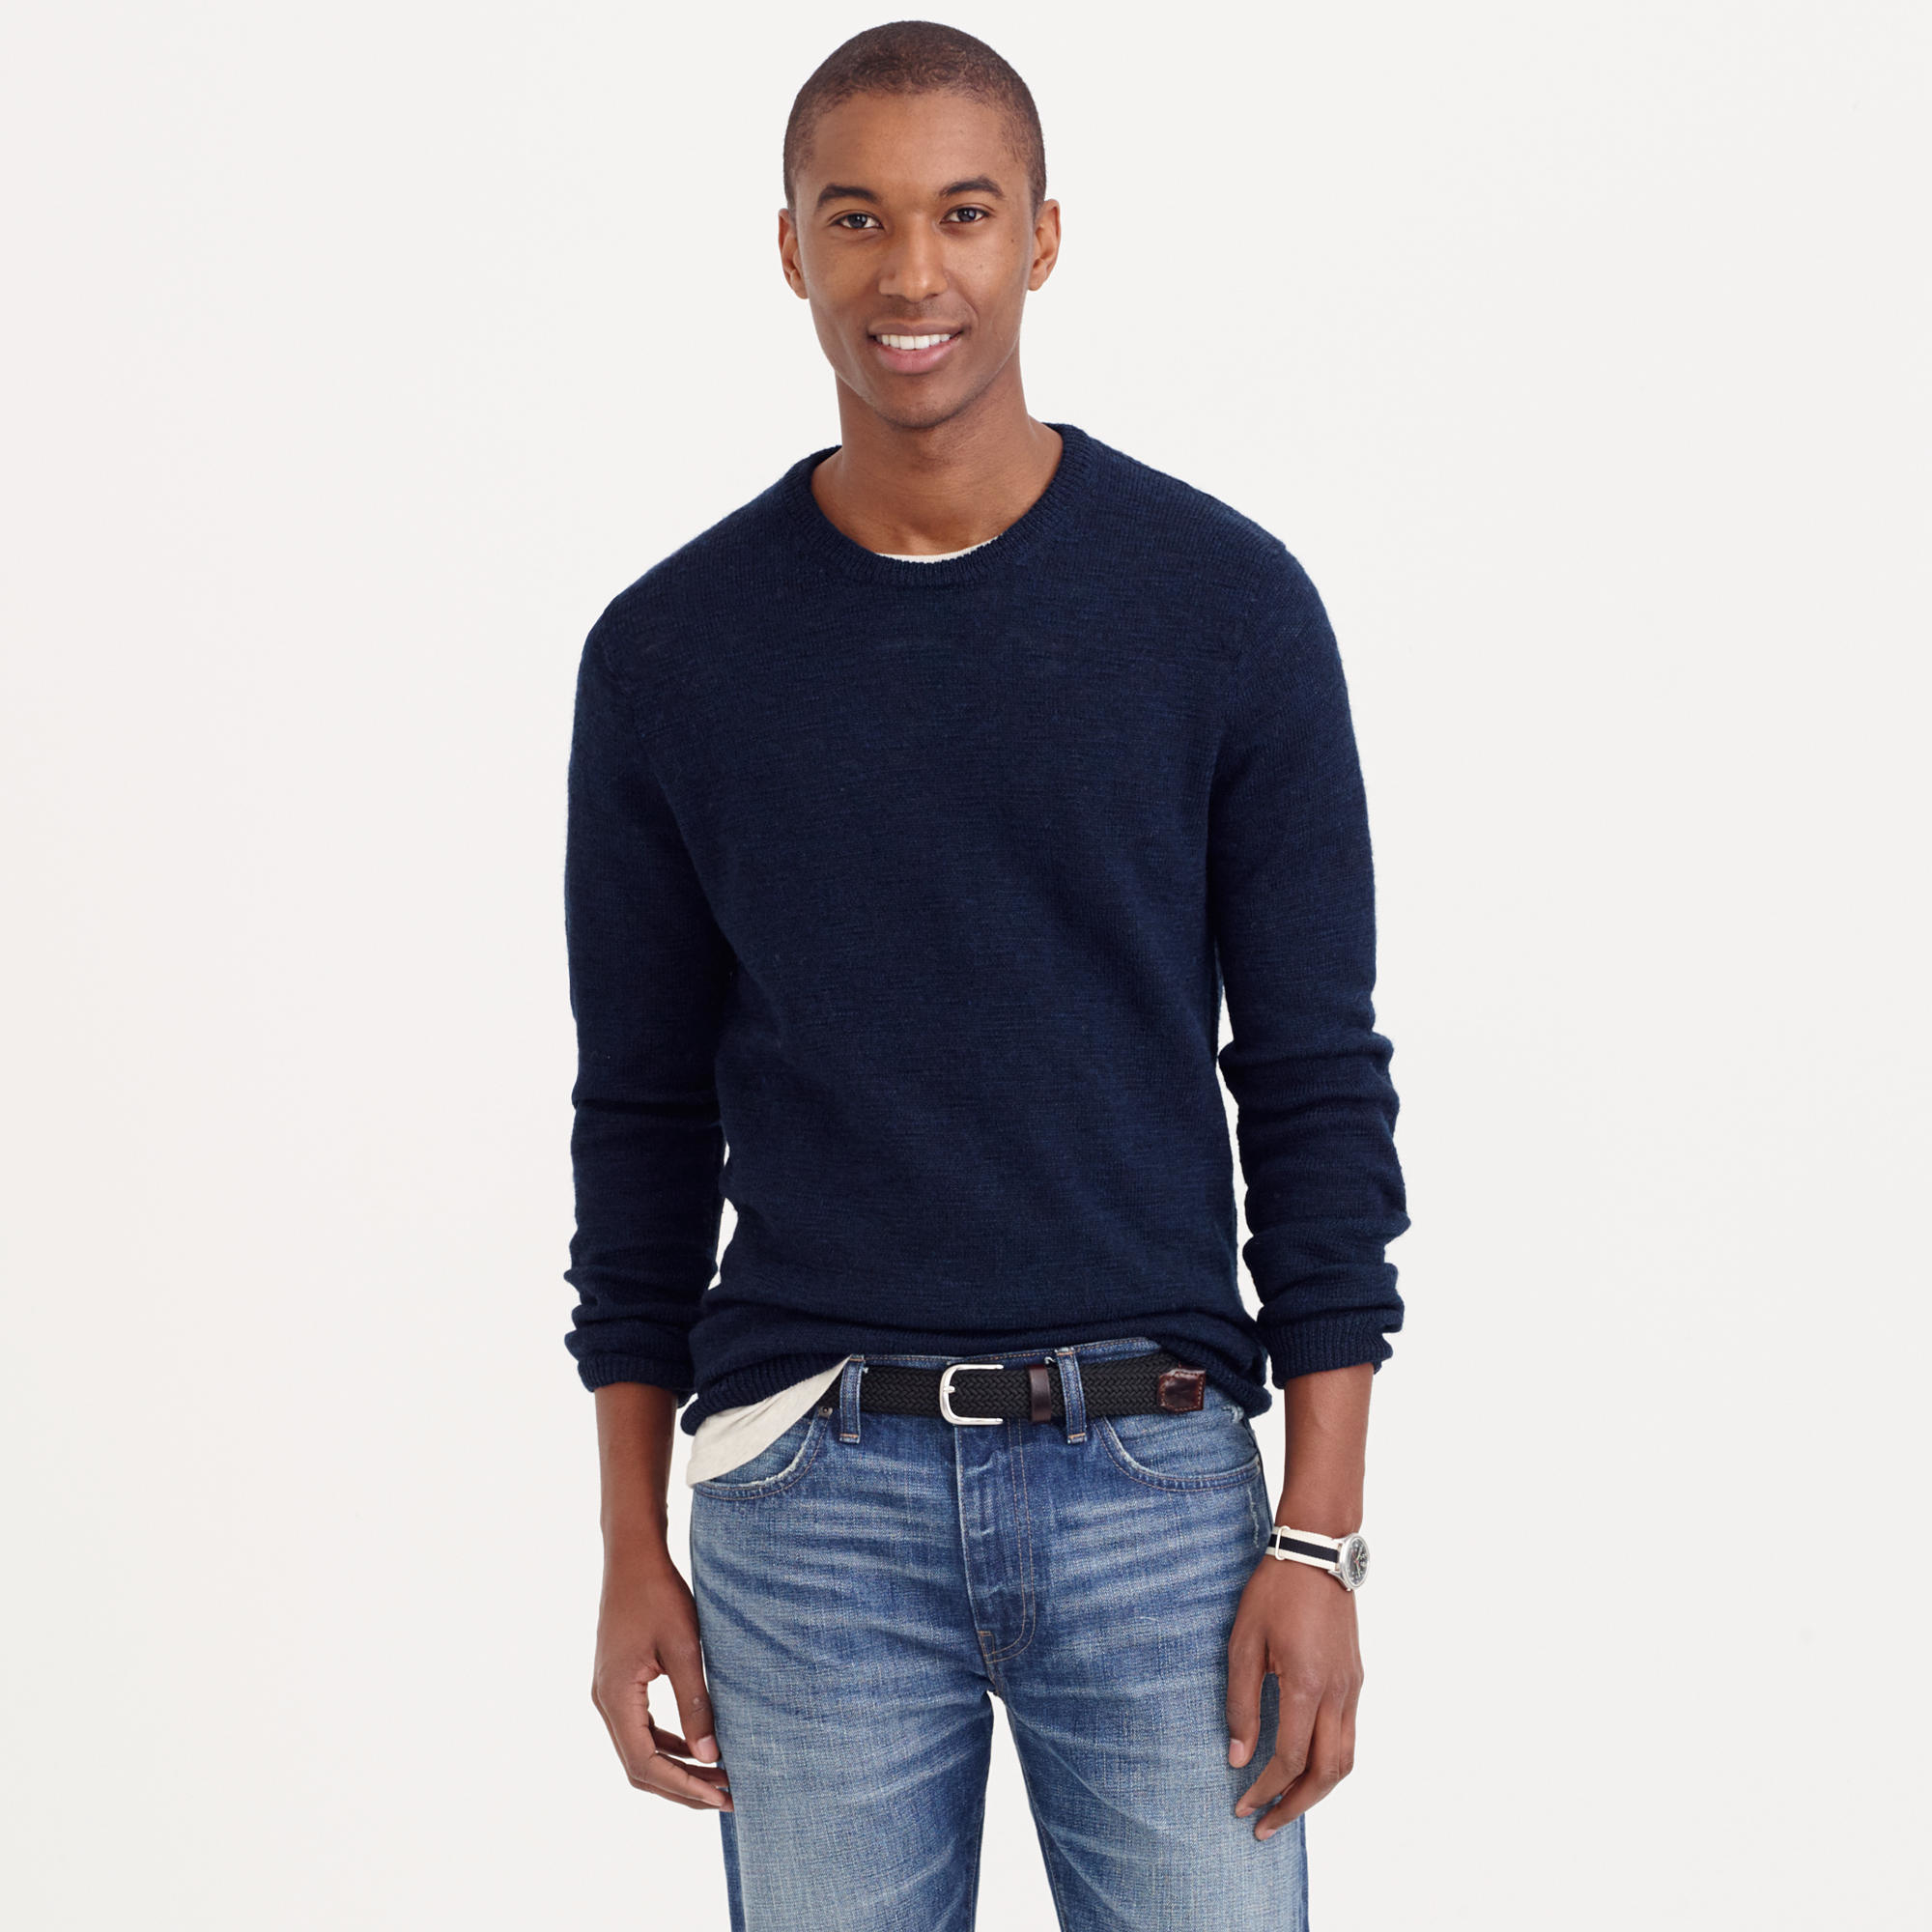 J.Crew Elbow patch Sweater in Natural